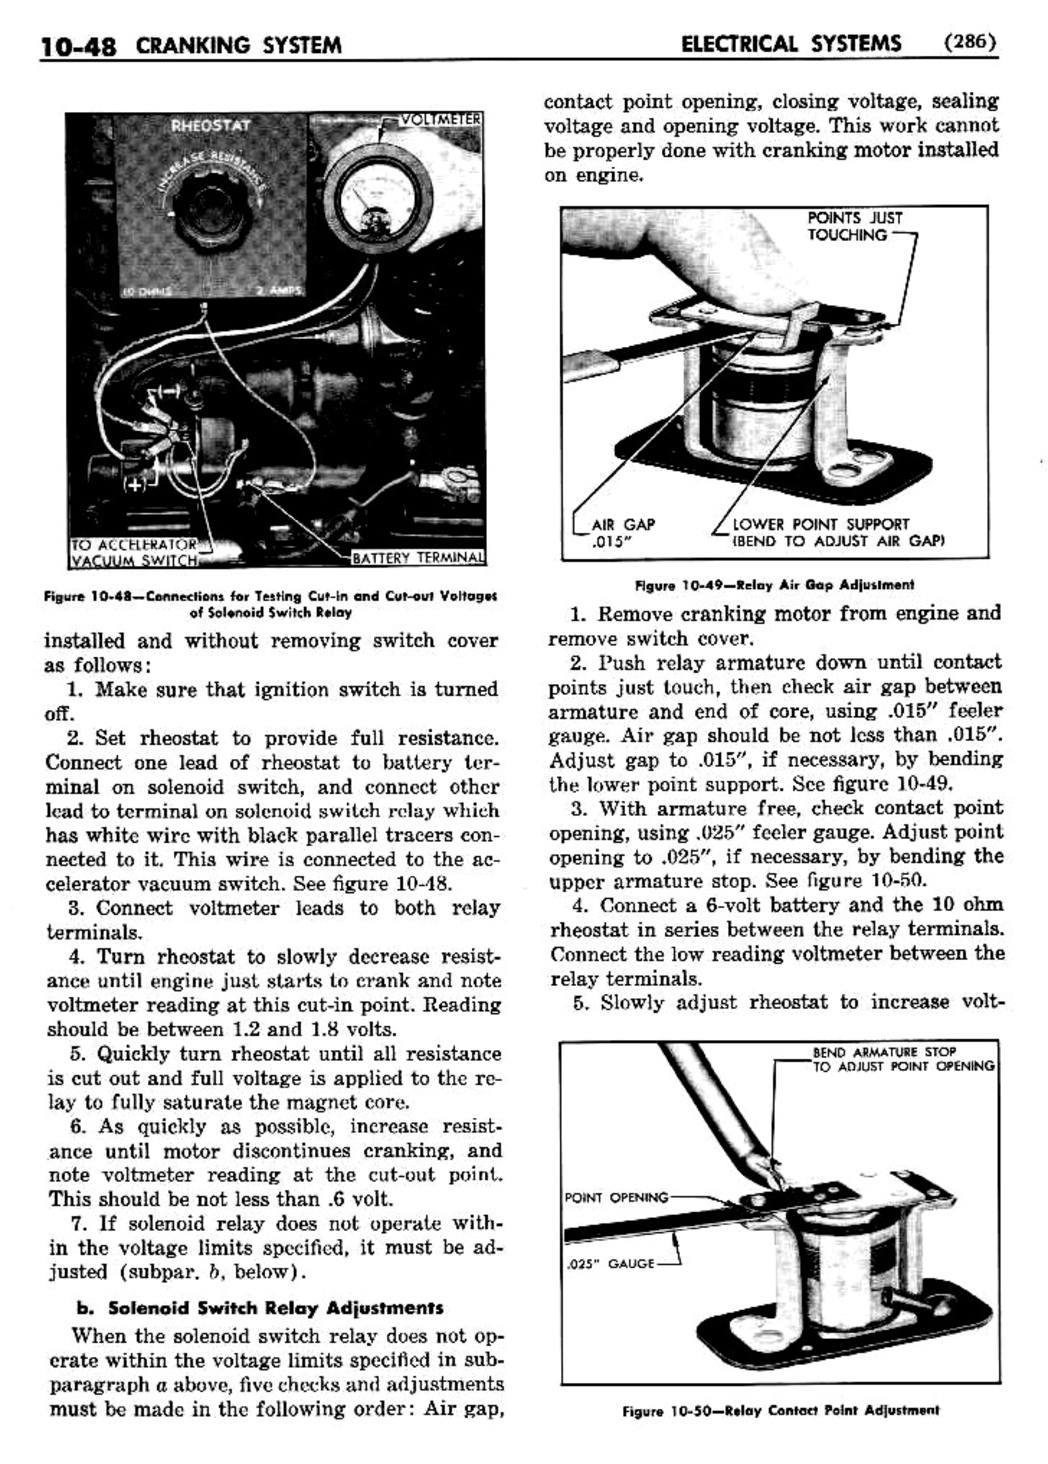 n_11 1950 Buick Shop Manual - Electrical Systems-048-048.jpg